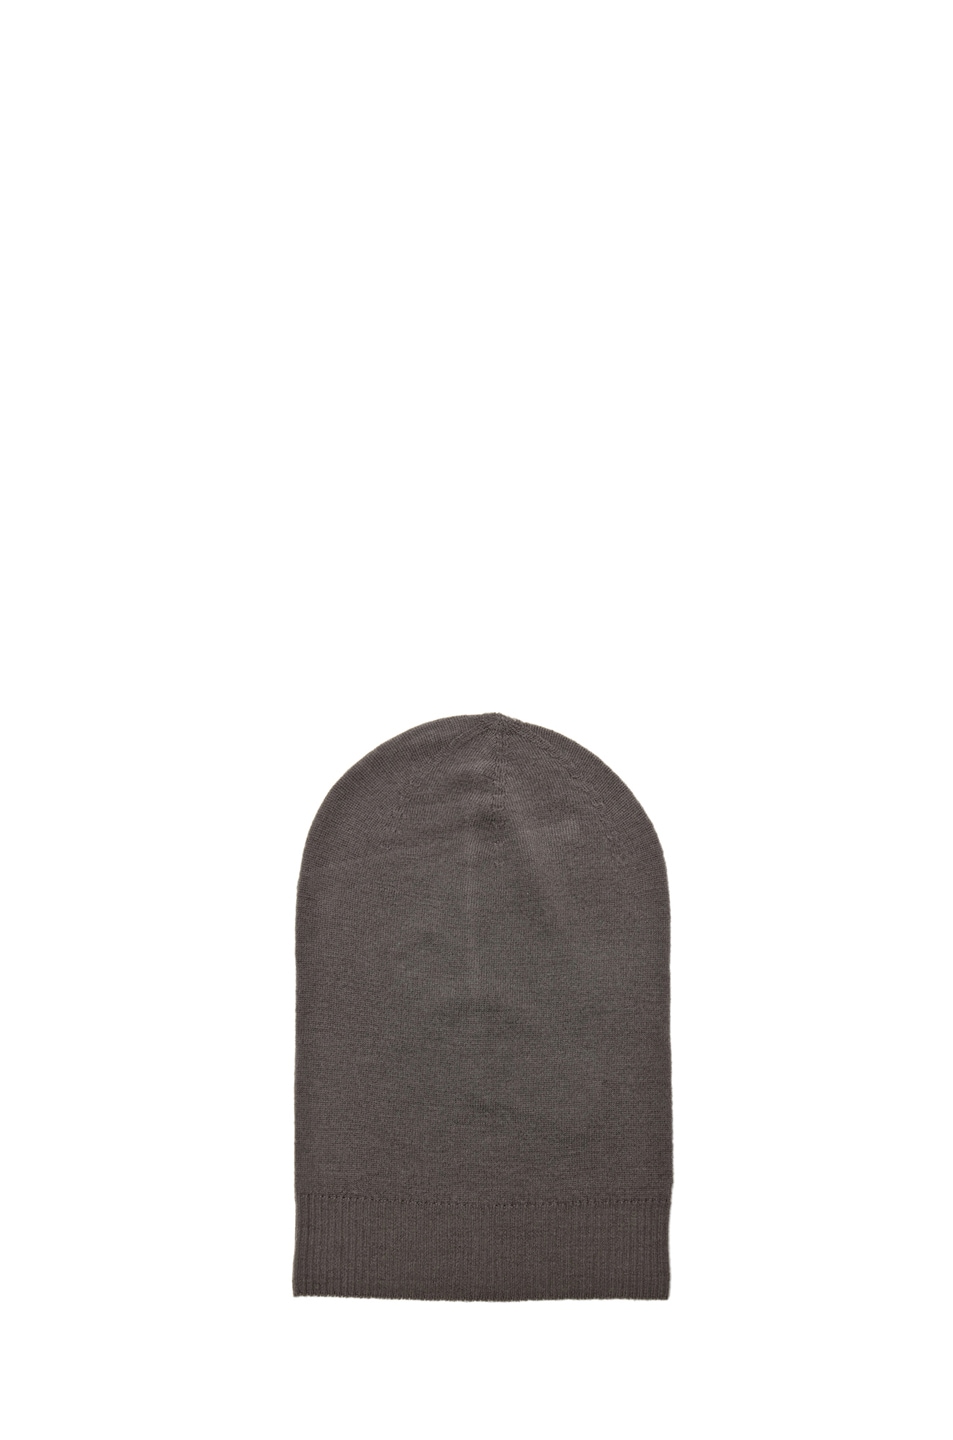 Image 1 of Rick Owens Maxi Boiled Beanie in Dark Dust